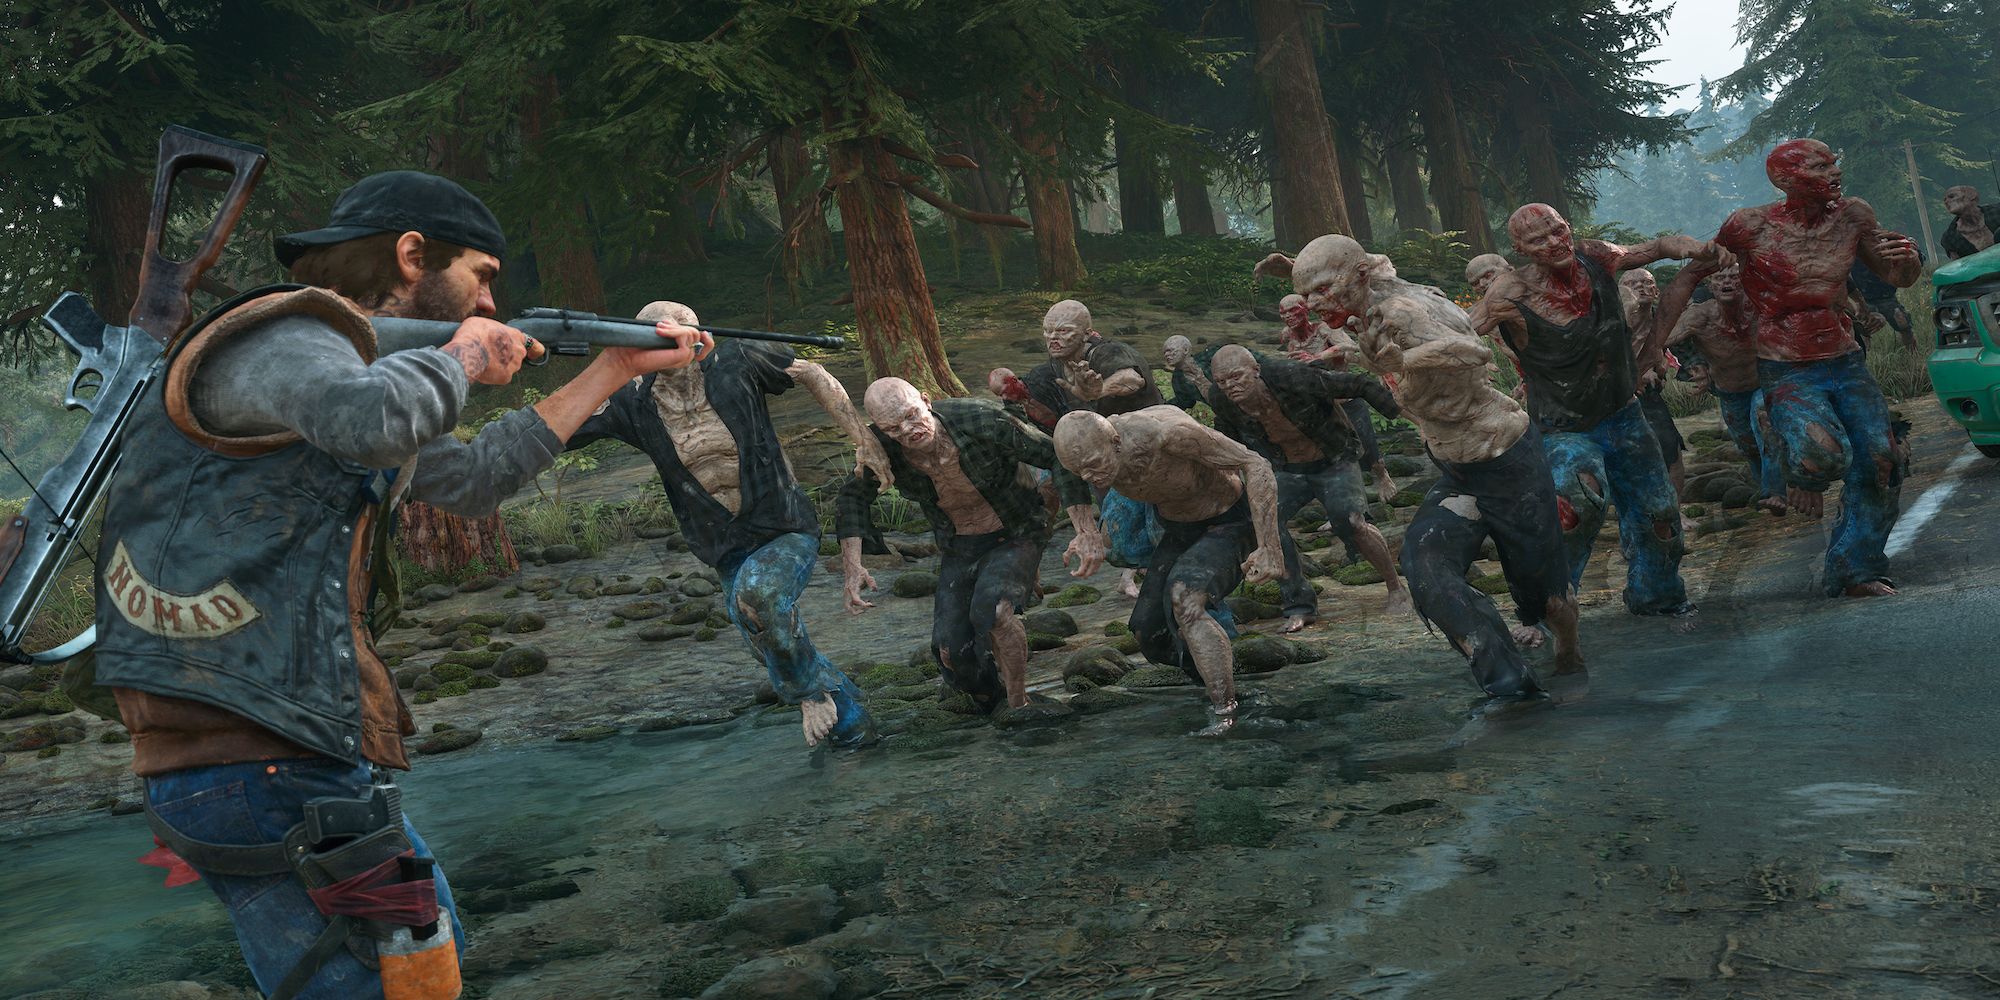 The gameplay of Days Gone